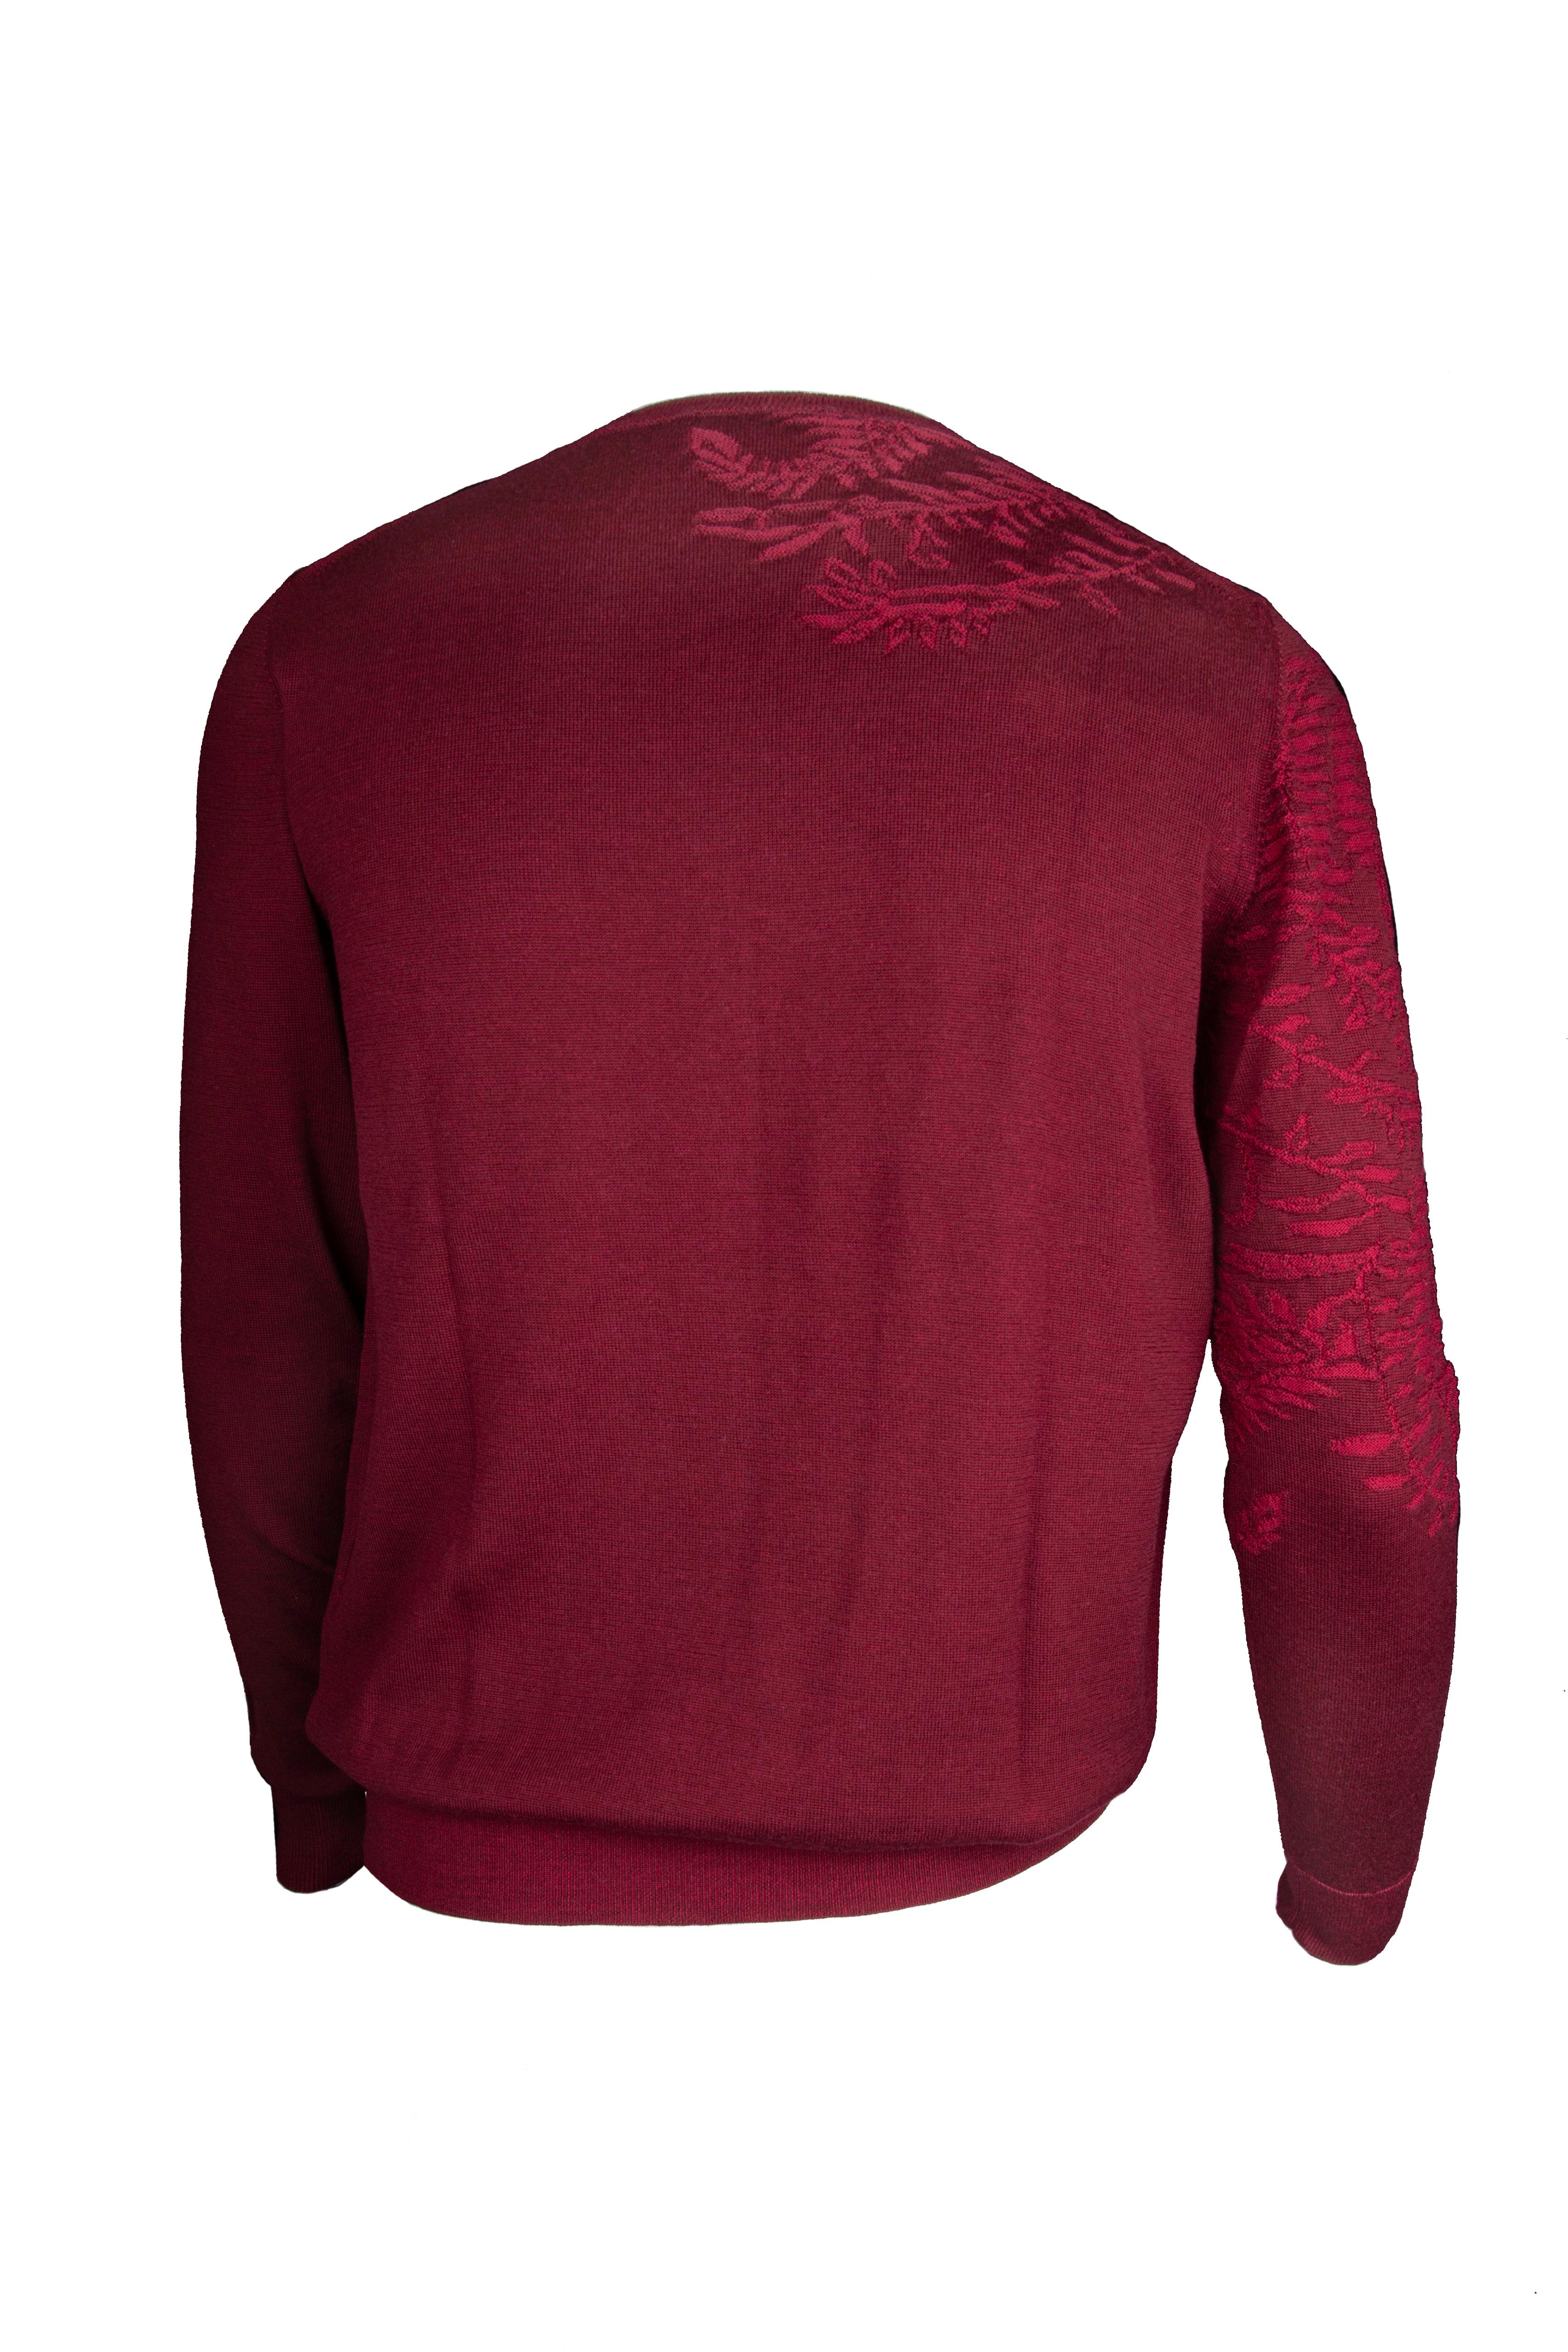 Etro Mens Burgundy Jacquard Thin Wool Sweater

This mens Etro sweater features a rich Burgundy jacquard pattern, a round neck, long sleeves, and thin wool material. Its lightweight fabric makes it a perfect choice for a spring night out. Brand new